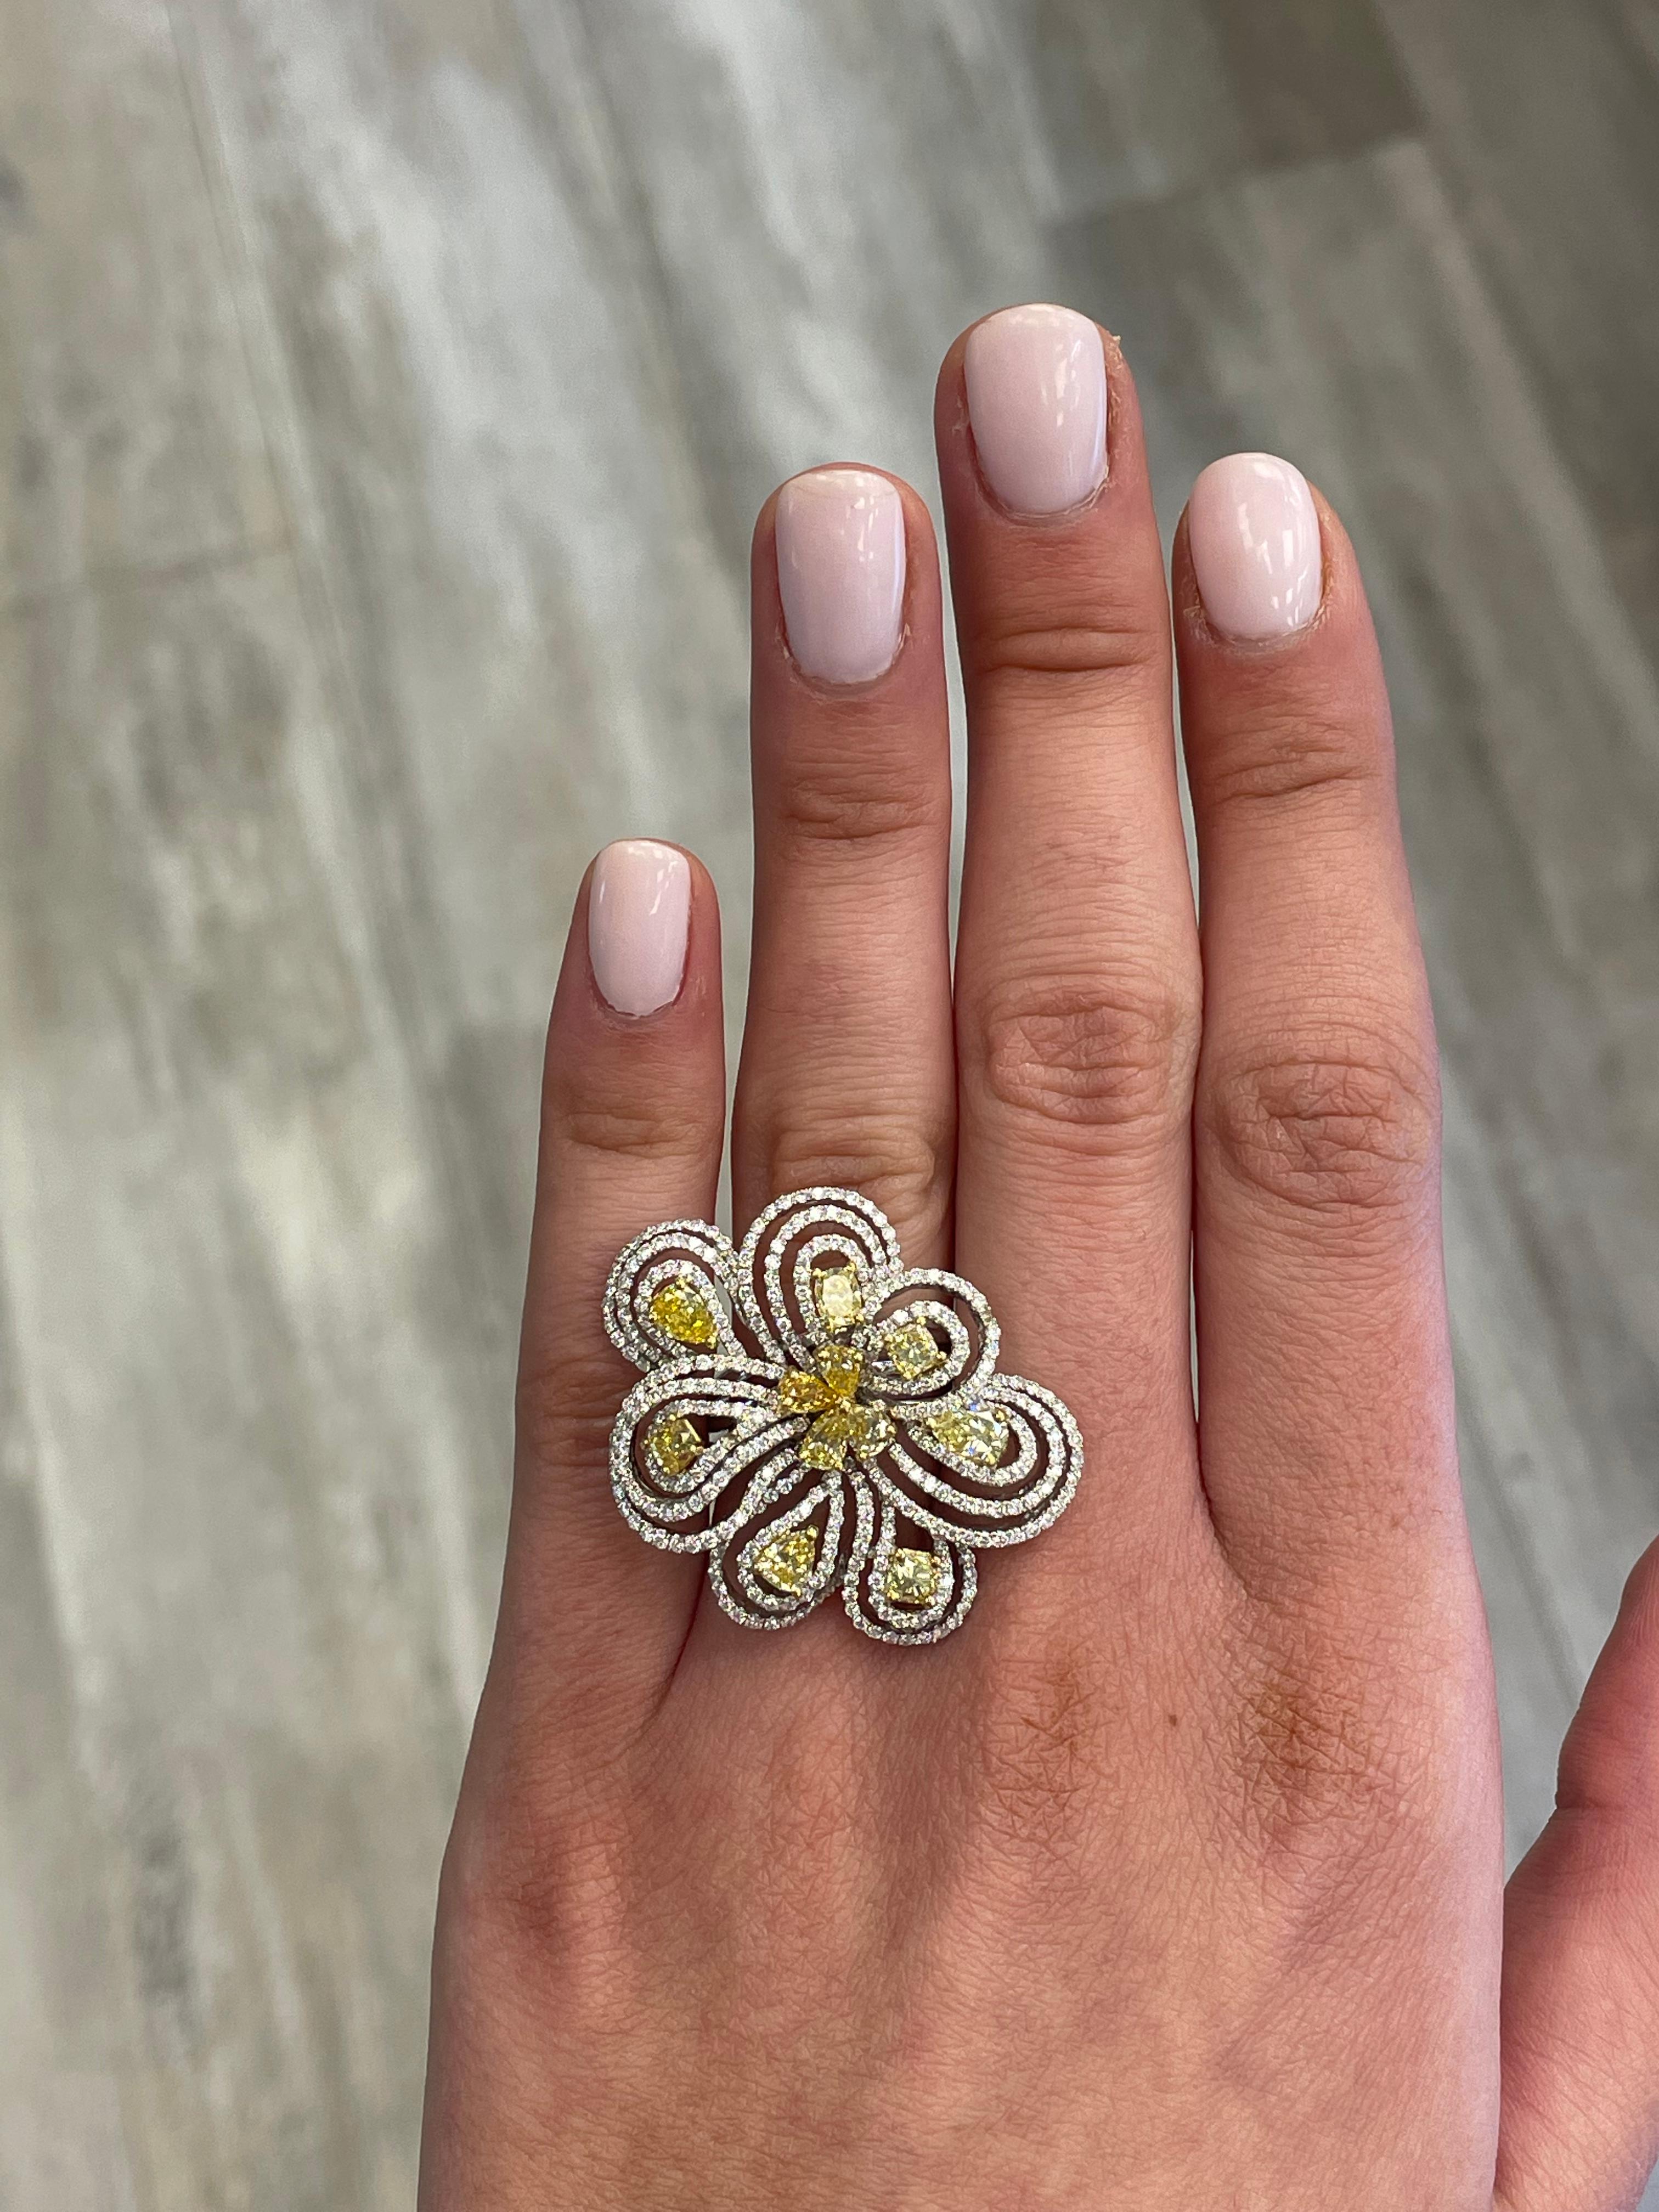 Modern yellow color diamond floral ring, by Alexander Beverly Hills. 
3.97 carats total diamond weight.
2.26 of a mix of approximately Fancy Yellow color diamonds. Complimented by 346 round brilliant cut diamonds, 1.71 carats total. Approximately